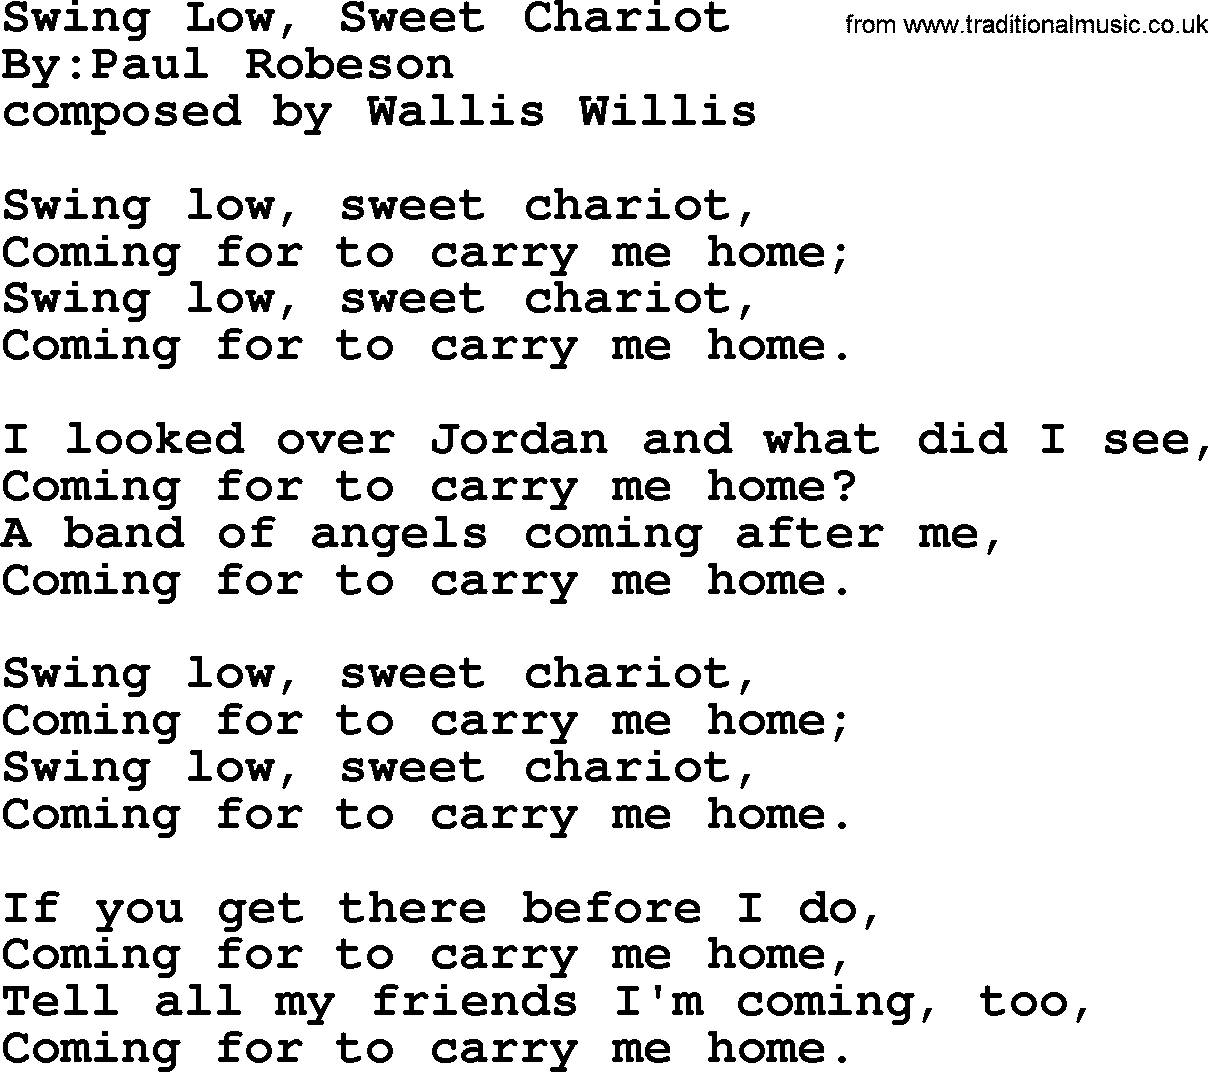 Political, Solidarity, Workers or Union song: Swing Low Sweet Chariot, lyrics